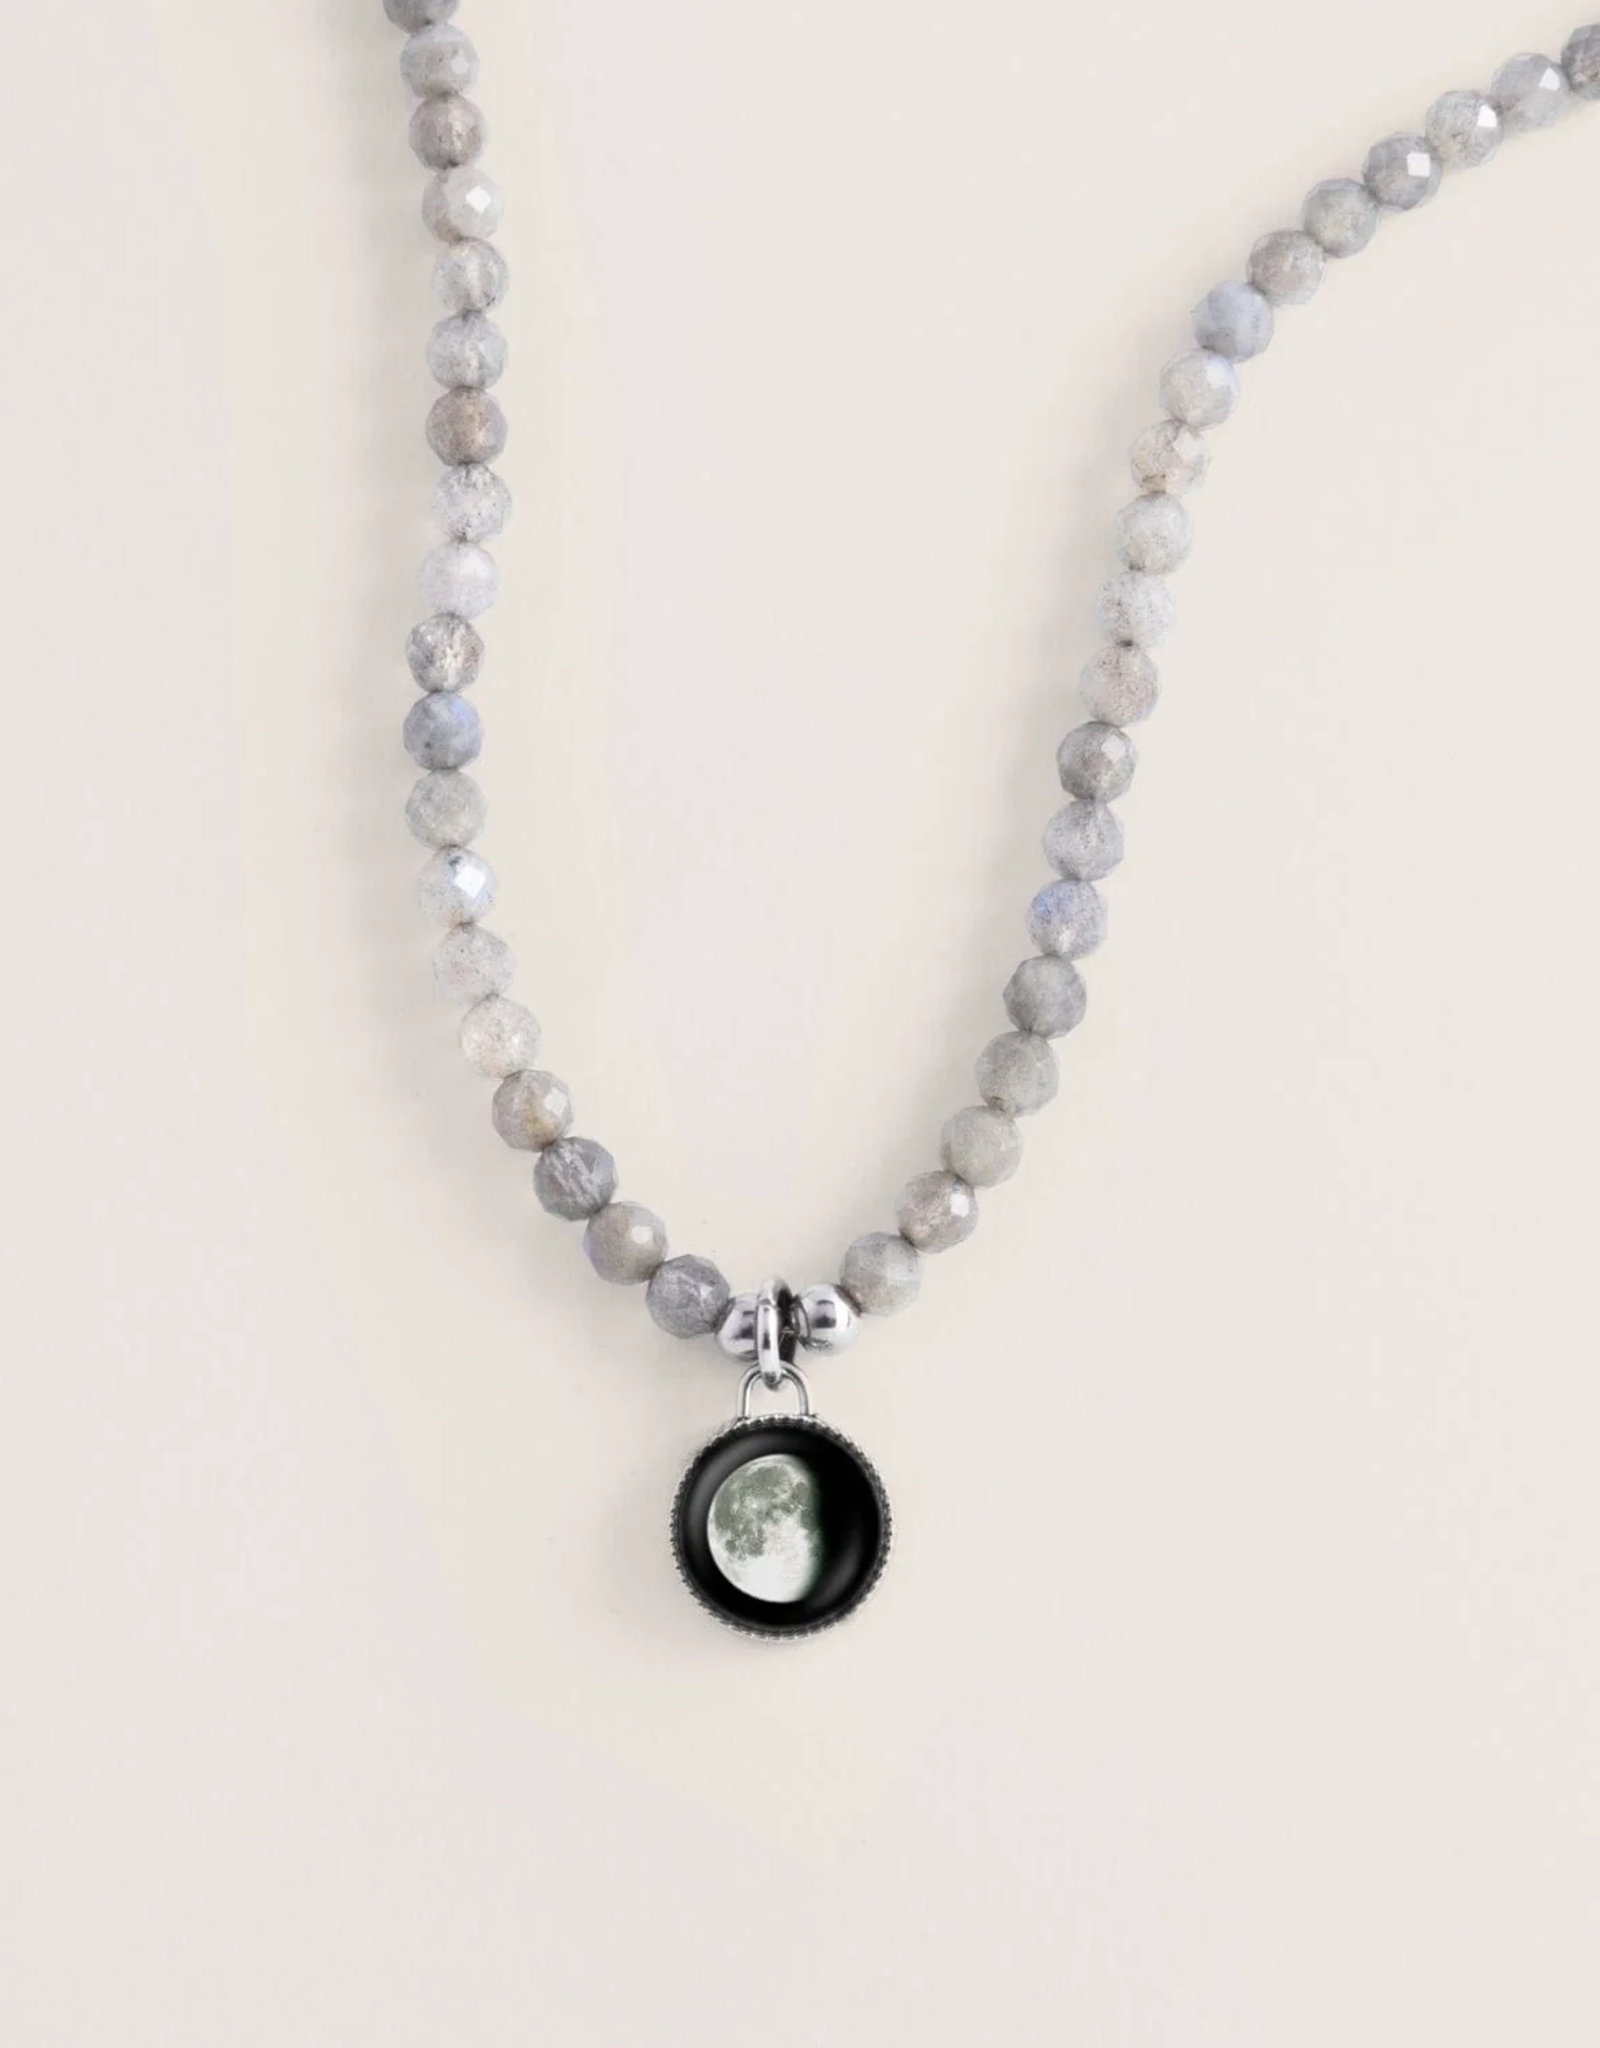 *Moonglow Bhavana Crystal Necklace  Gray Agate